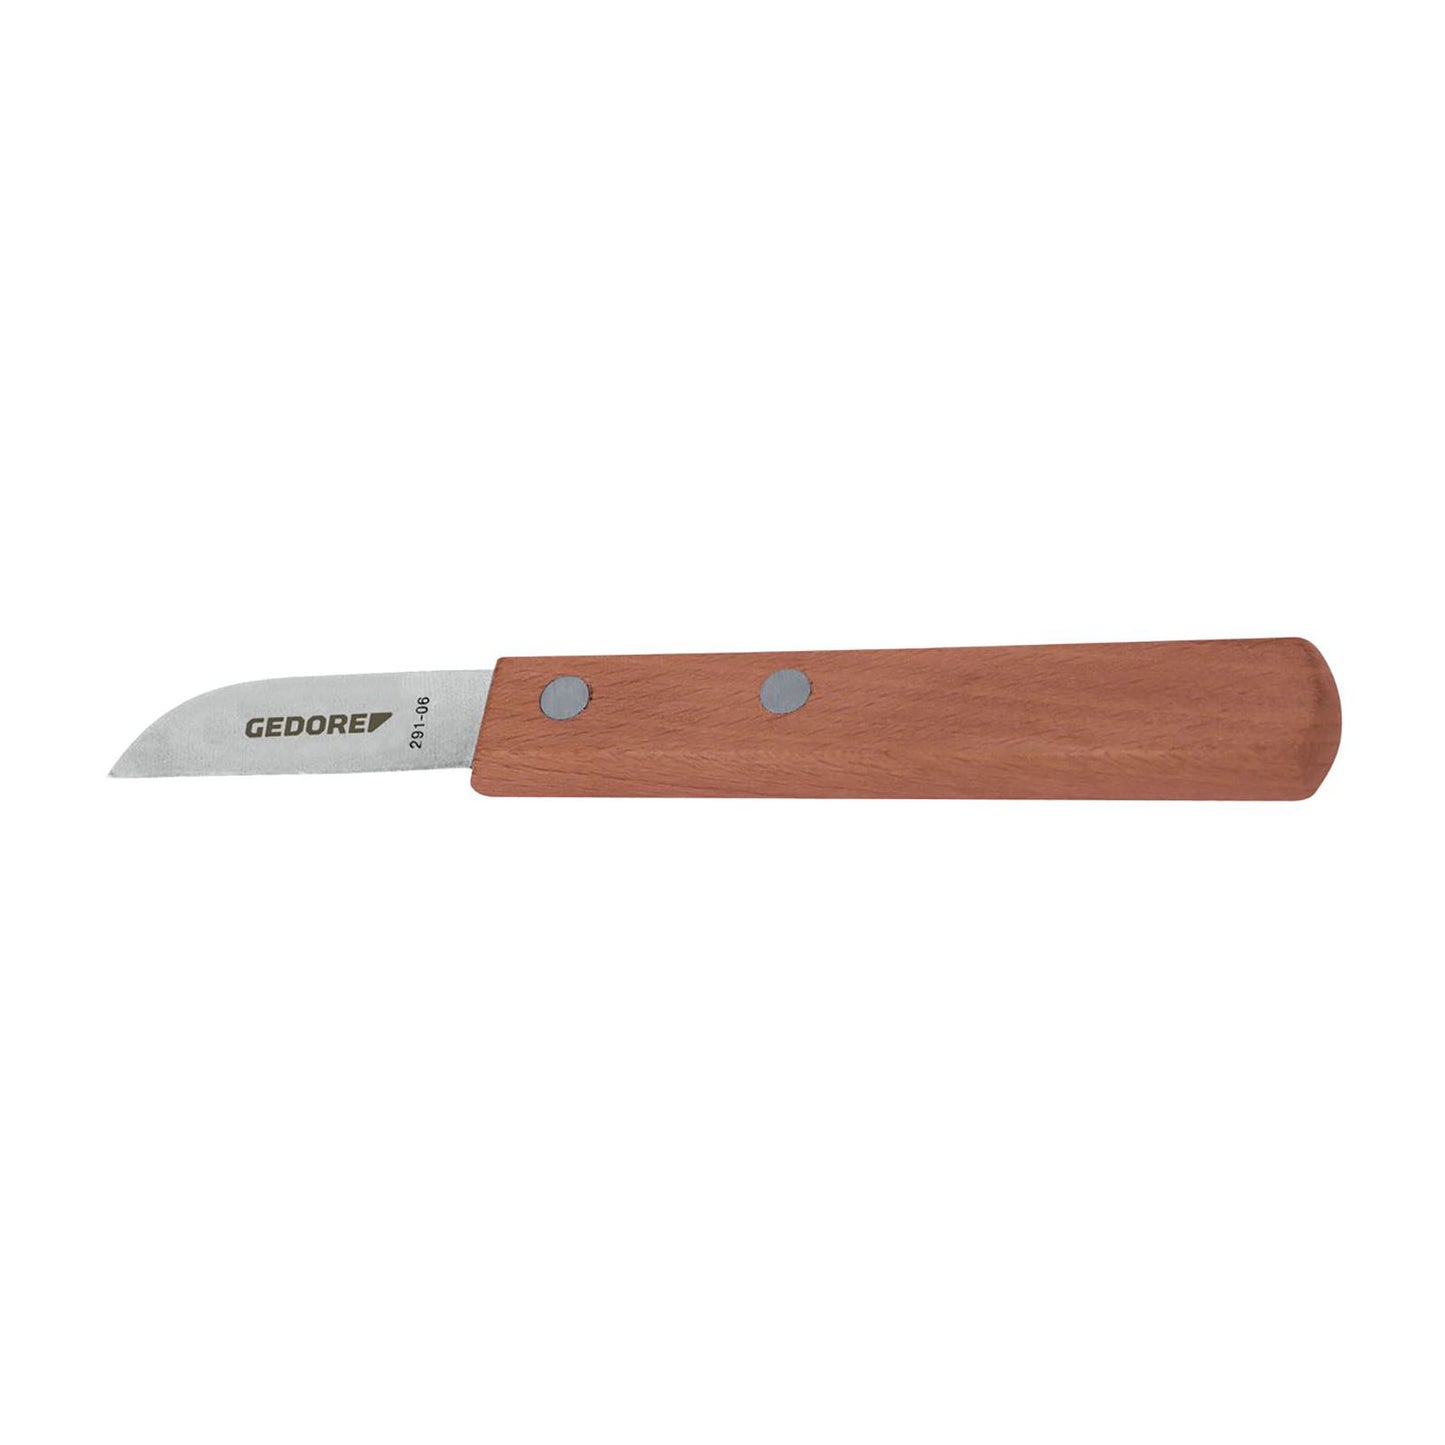 GEDORE 0291-06 - Cable cutter knife (9107910)